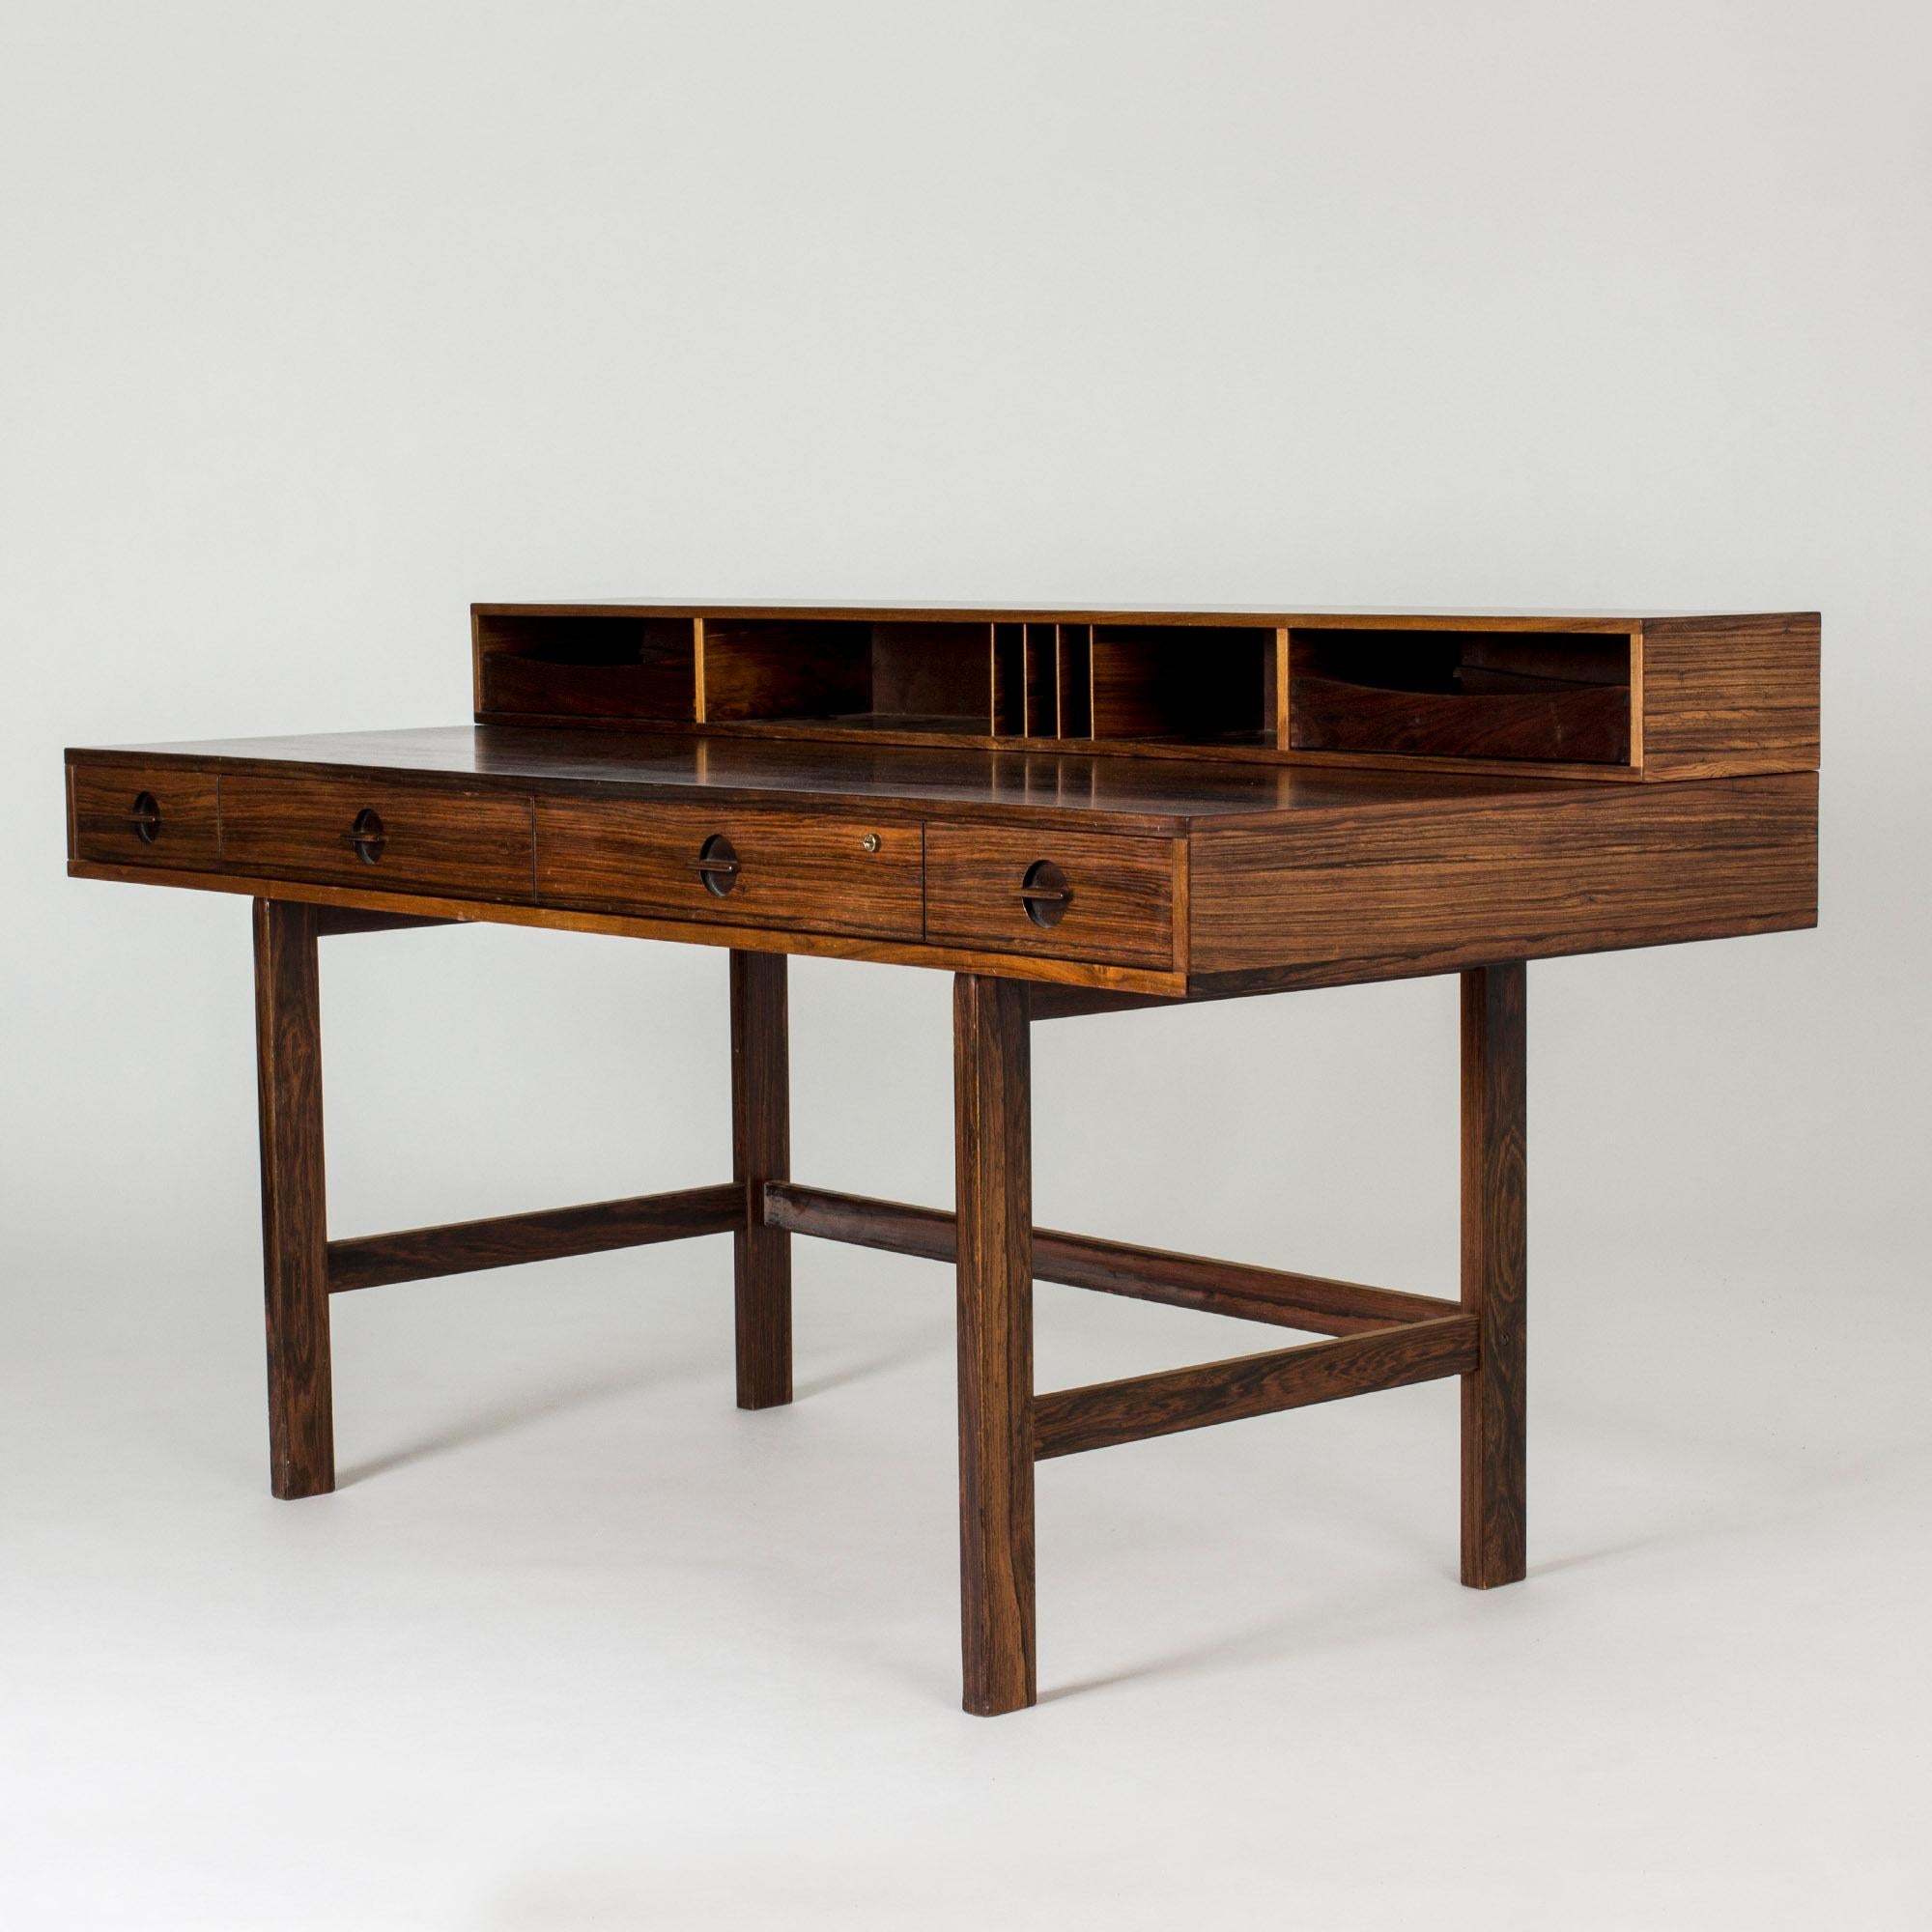 Amazing, versatile desk by Peter Løvig Nielsen, made in beautiful rosewood. The shelf on the table top can be flipped to extend the depth of the desk. Shelves on both sides, possible to be used by two people at the same time. Nice attention to